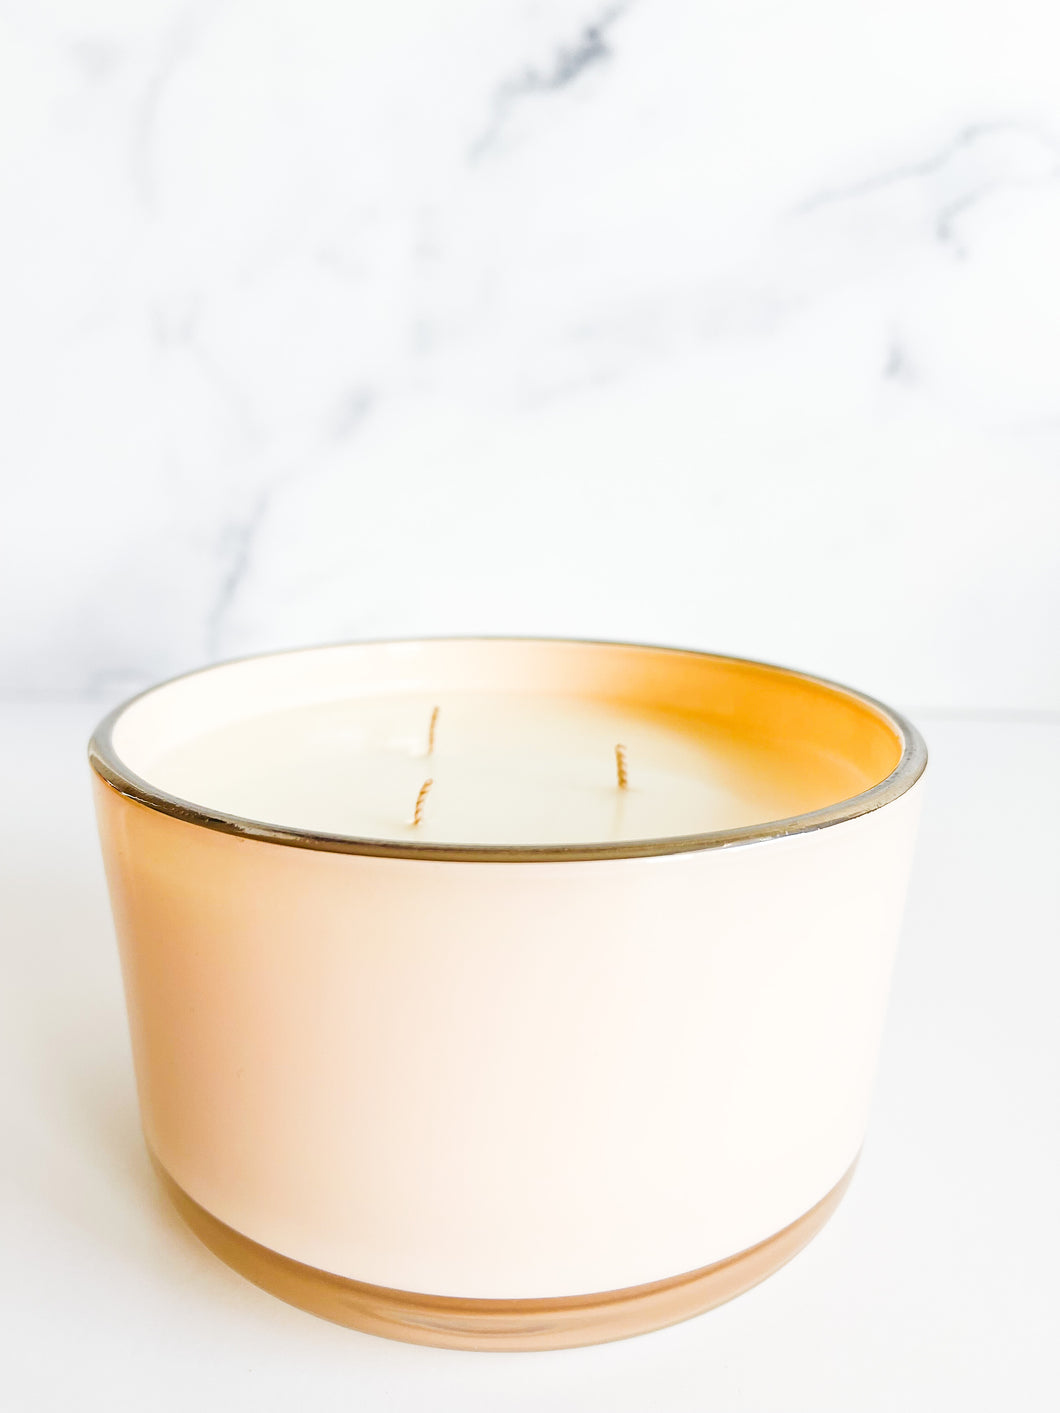 scented candle,how to make a scented candle,coffee scented candle,christmas scented candle,pine scented candle,rose scented candle,vanilla scented candle,leather scented candle, lemon scented candle,tobacco scented candle,scented candle wax,lavender scent